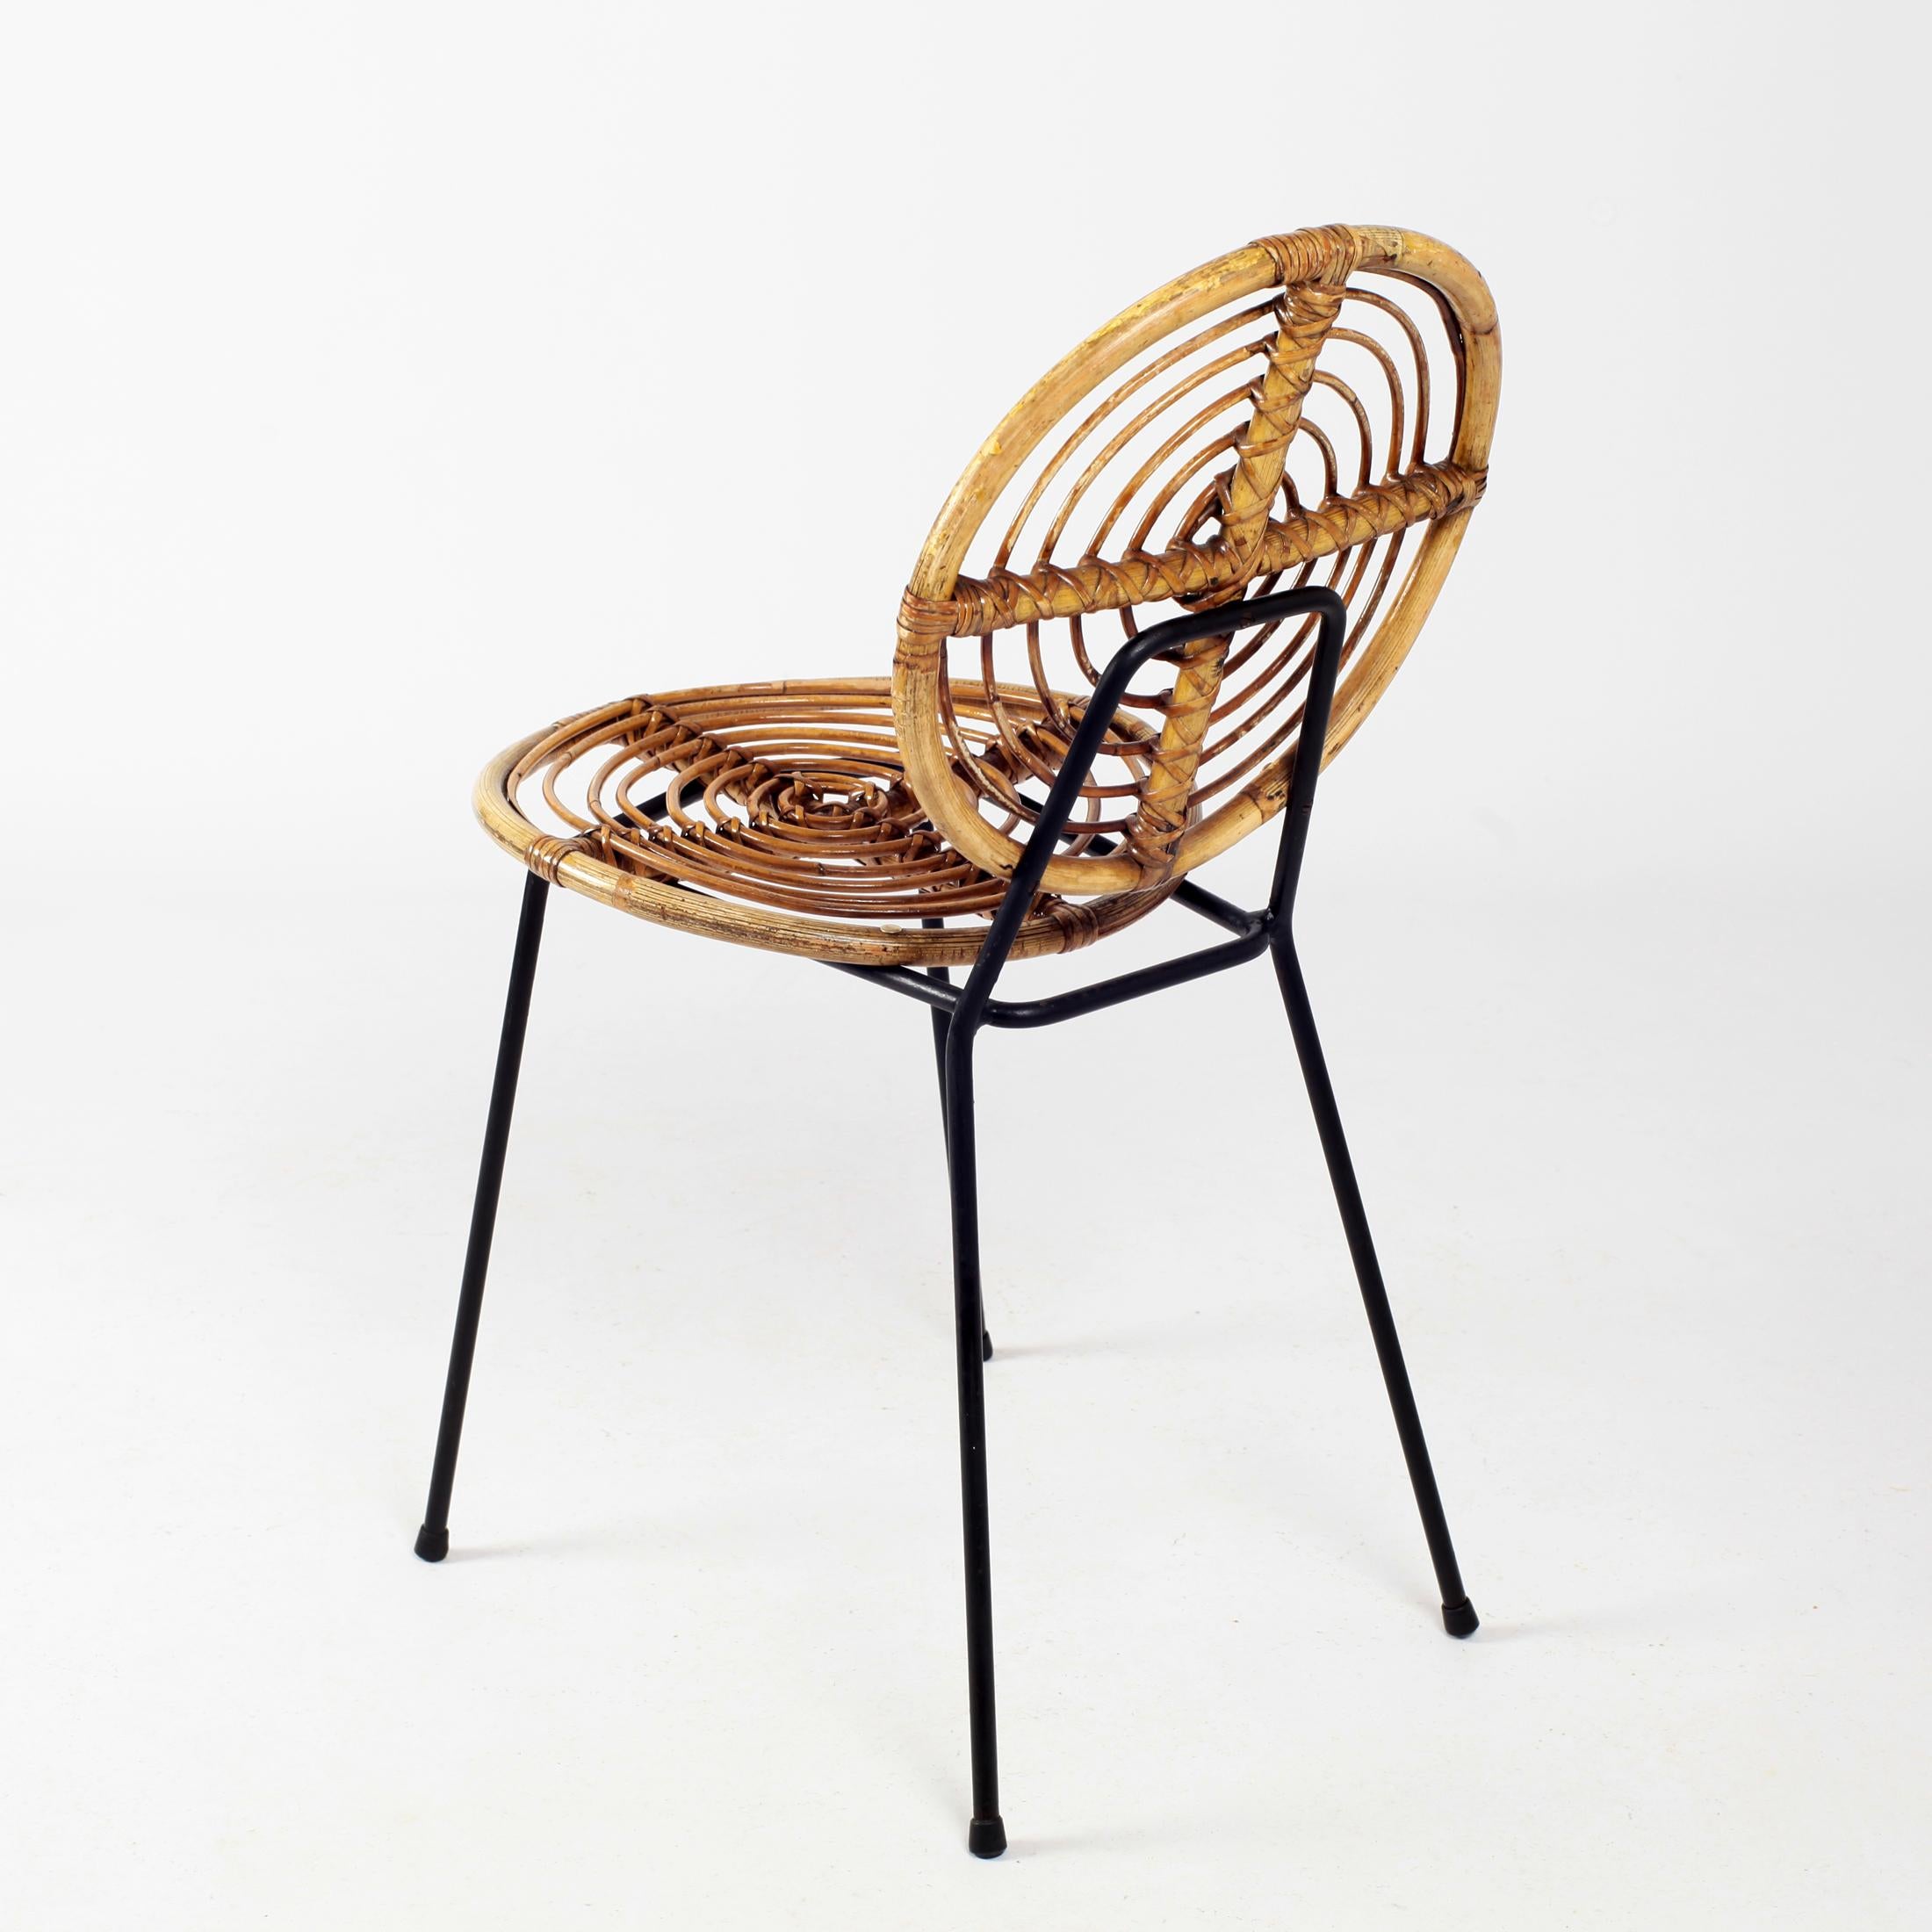 Blackened Thonet Rattan Chairs CM166 on Black Metal Base, 1950s France 2 available